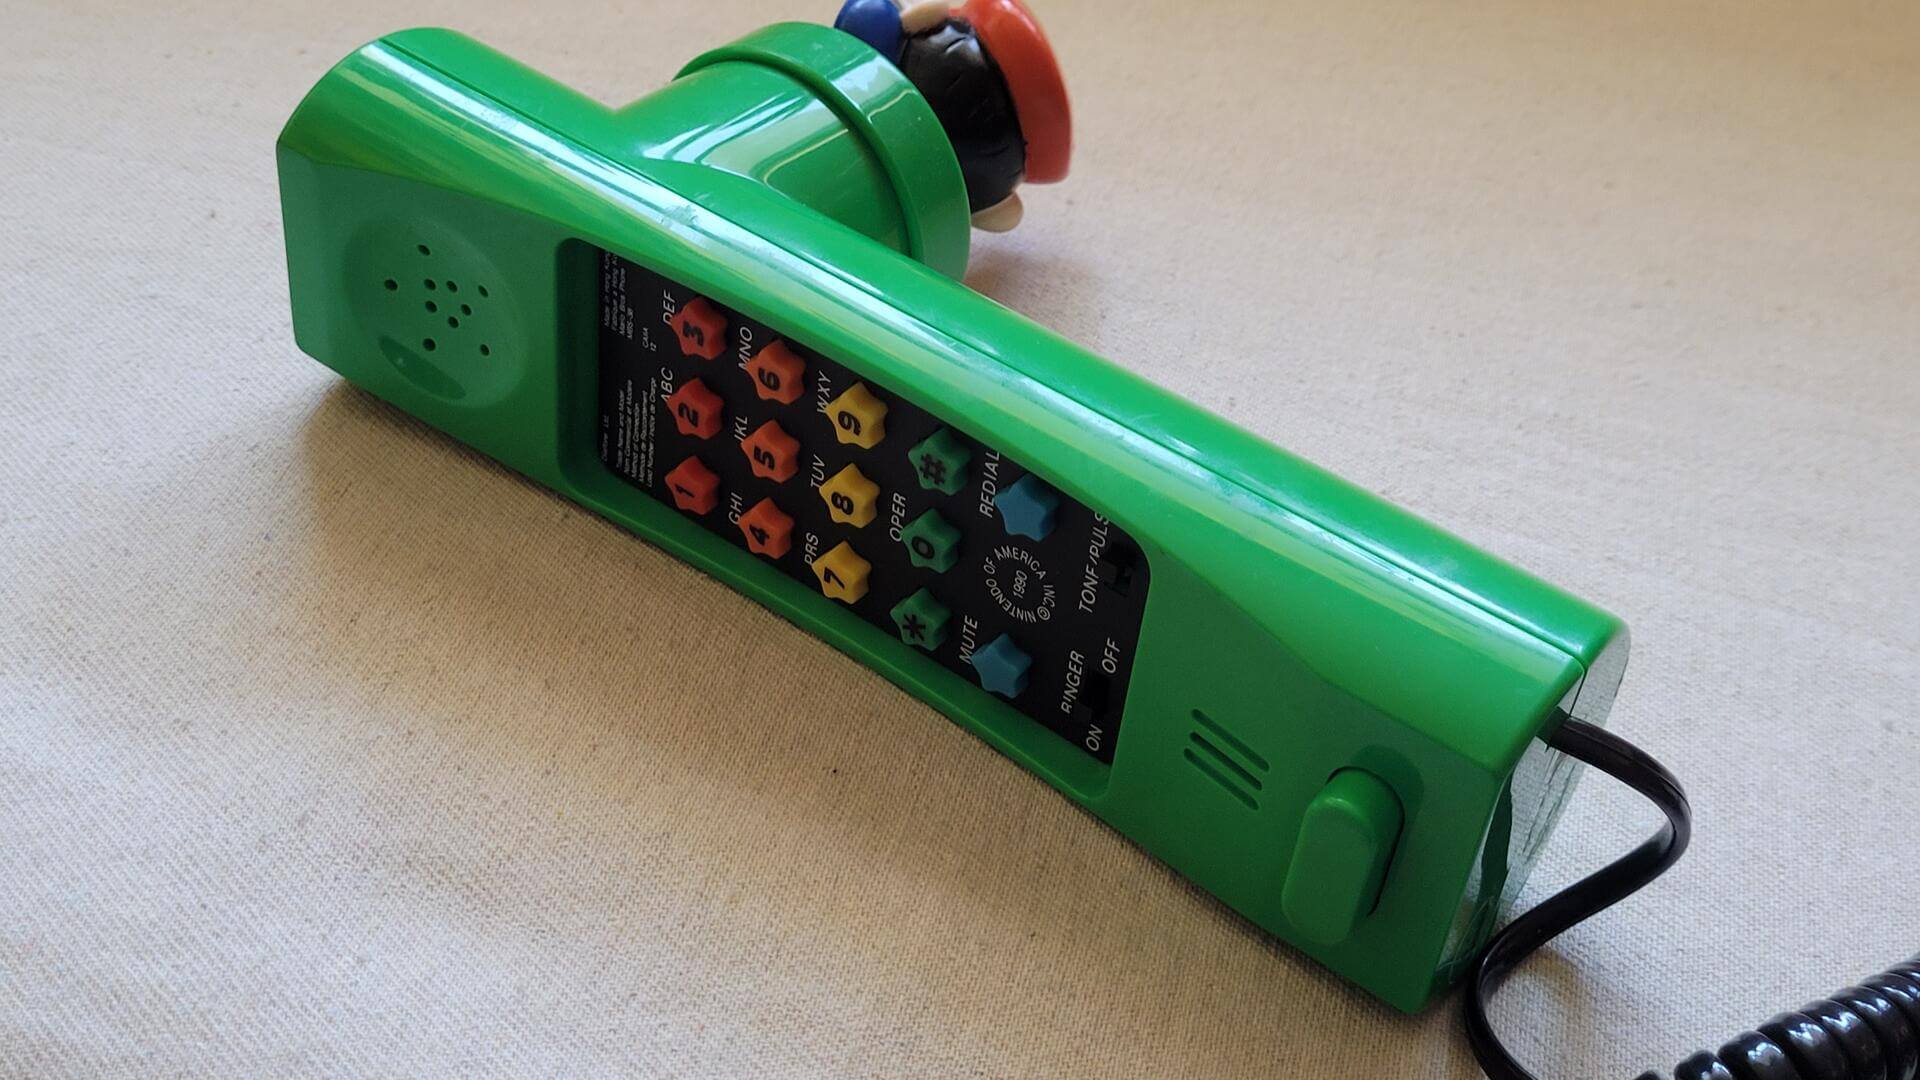 Rare vintage green Super Mario Brothers Nintendo touch tone telephone model MBS-38. Retro 1990s made in Hong Kong collectible Nintendo phone and electronic gadget